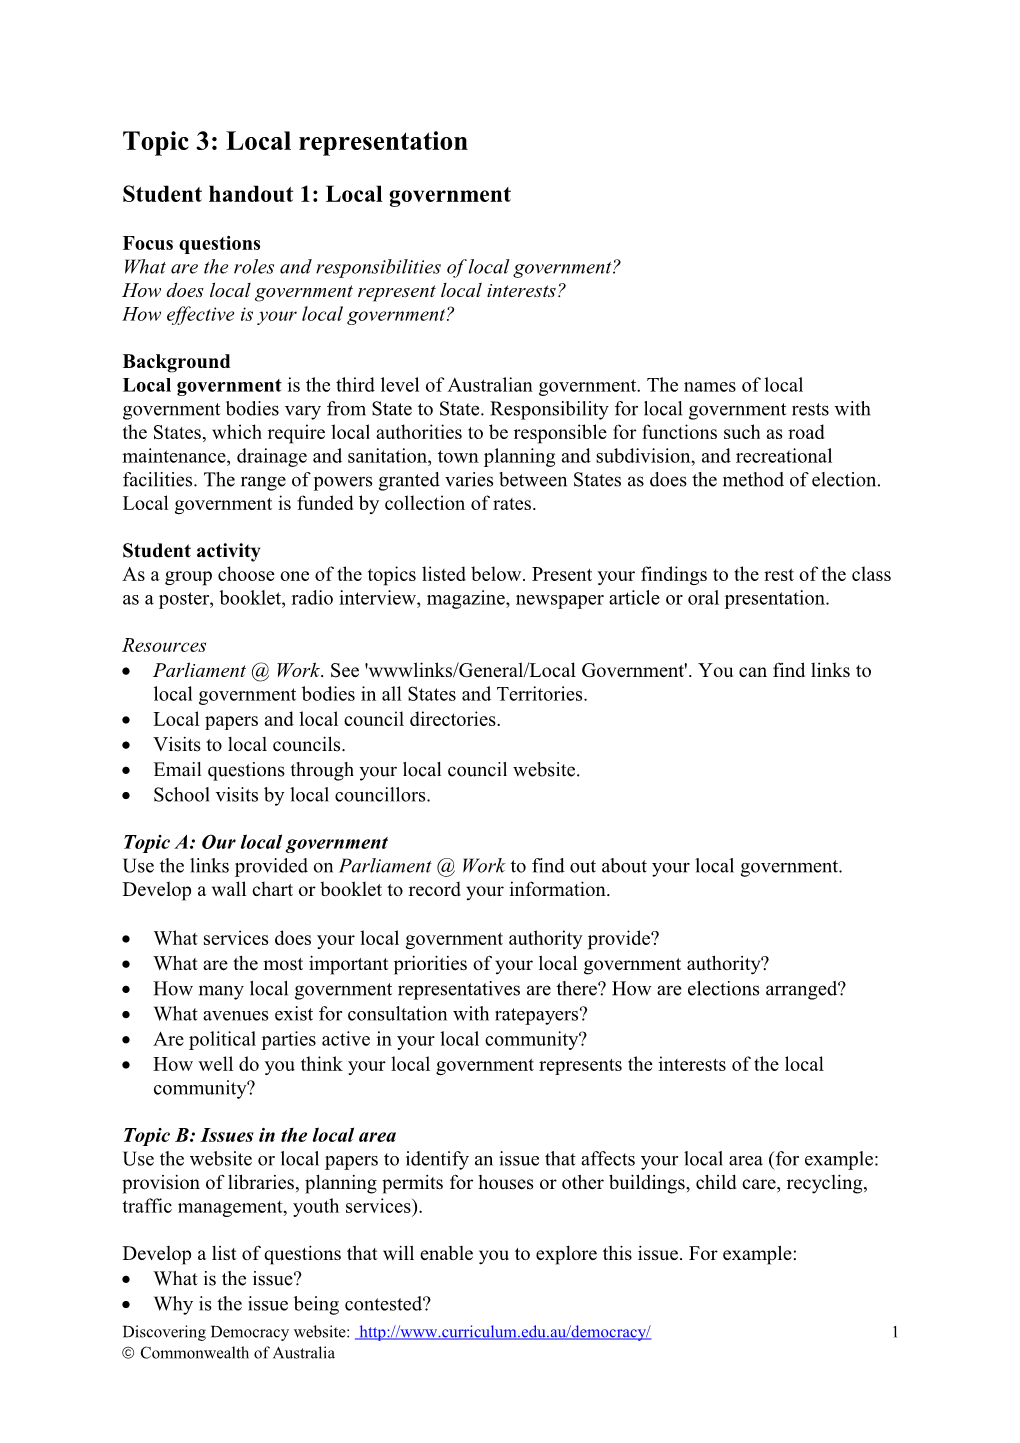 Student Handout 1: Local Government